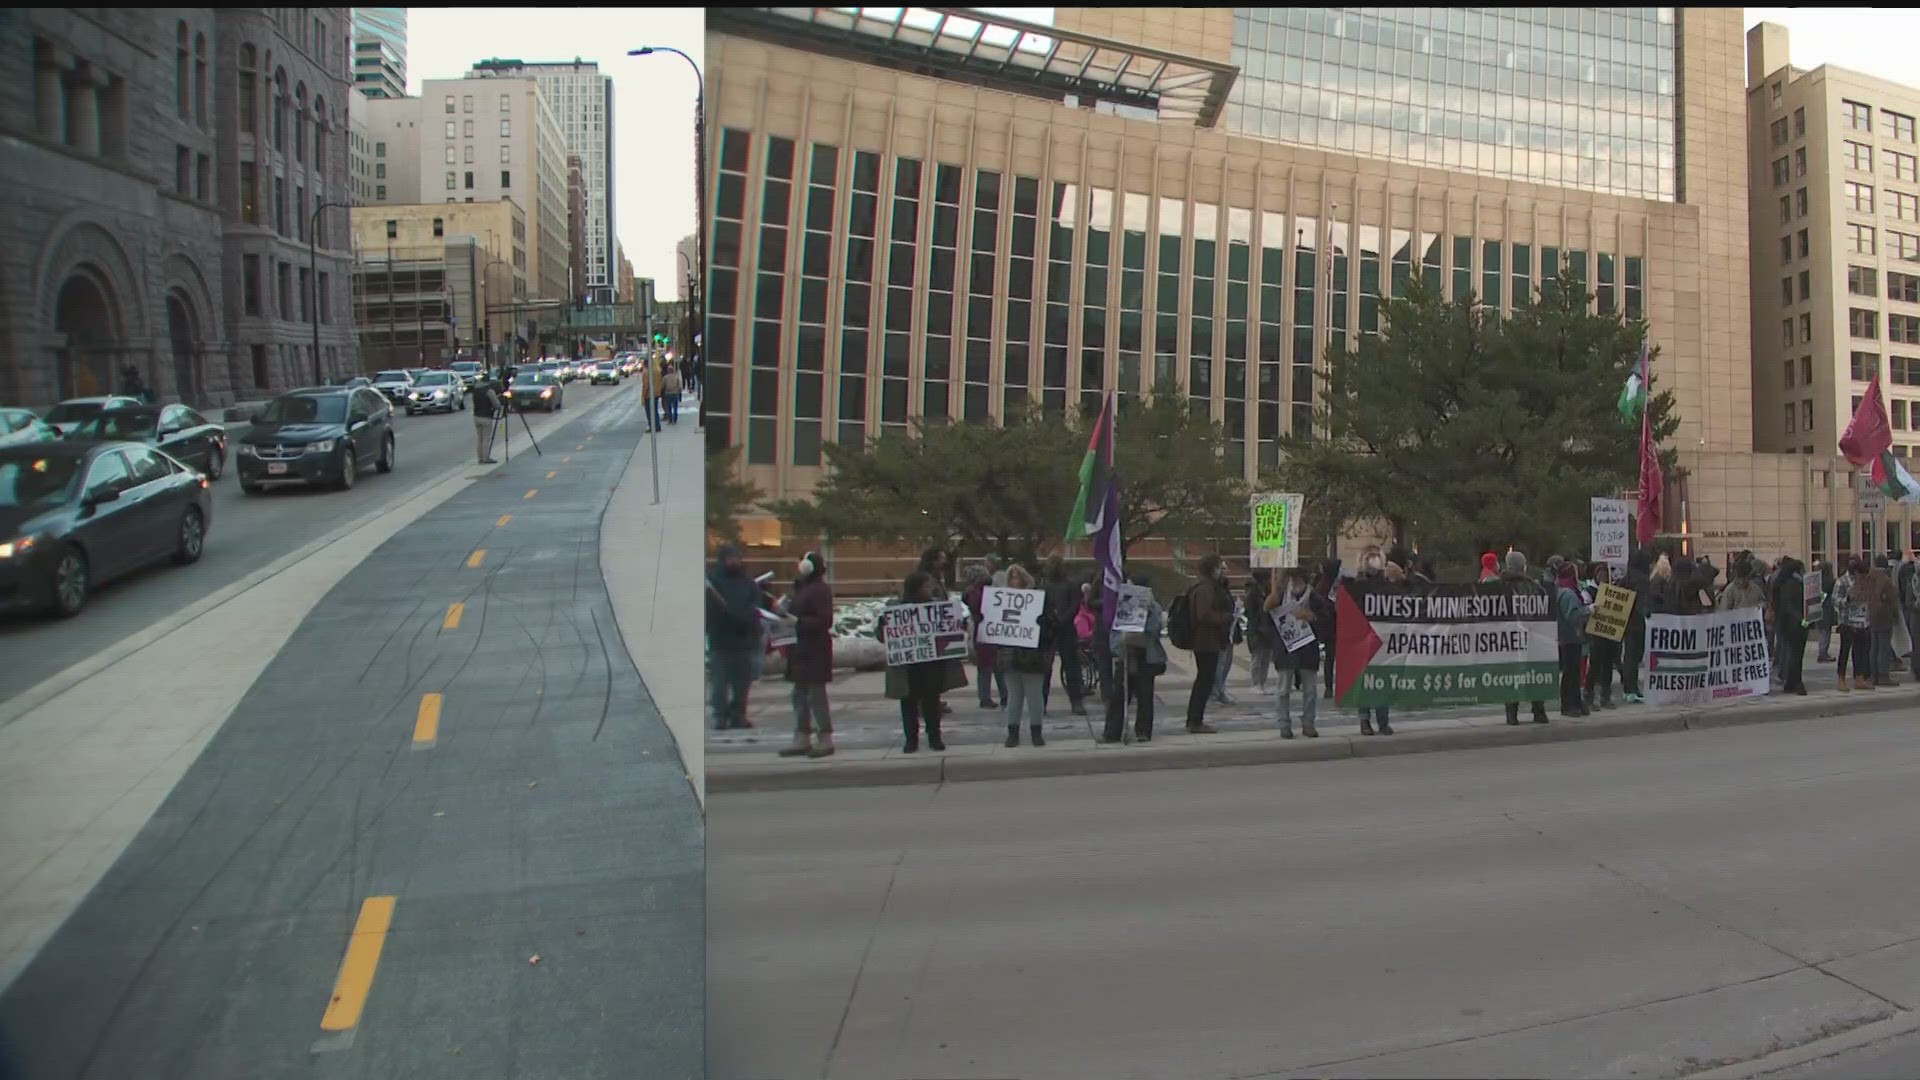 The demonstration took place in downtown Minneapolis.